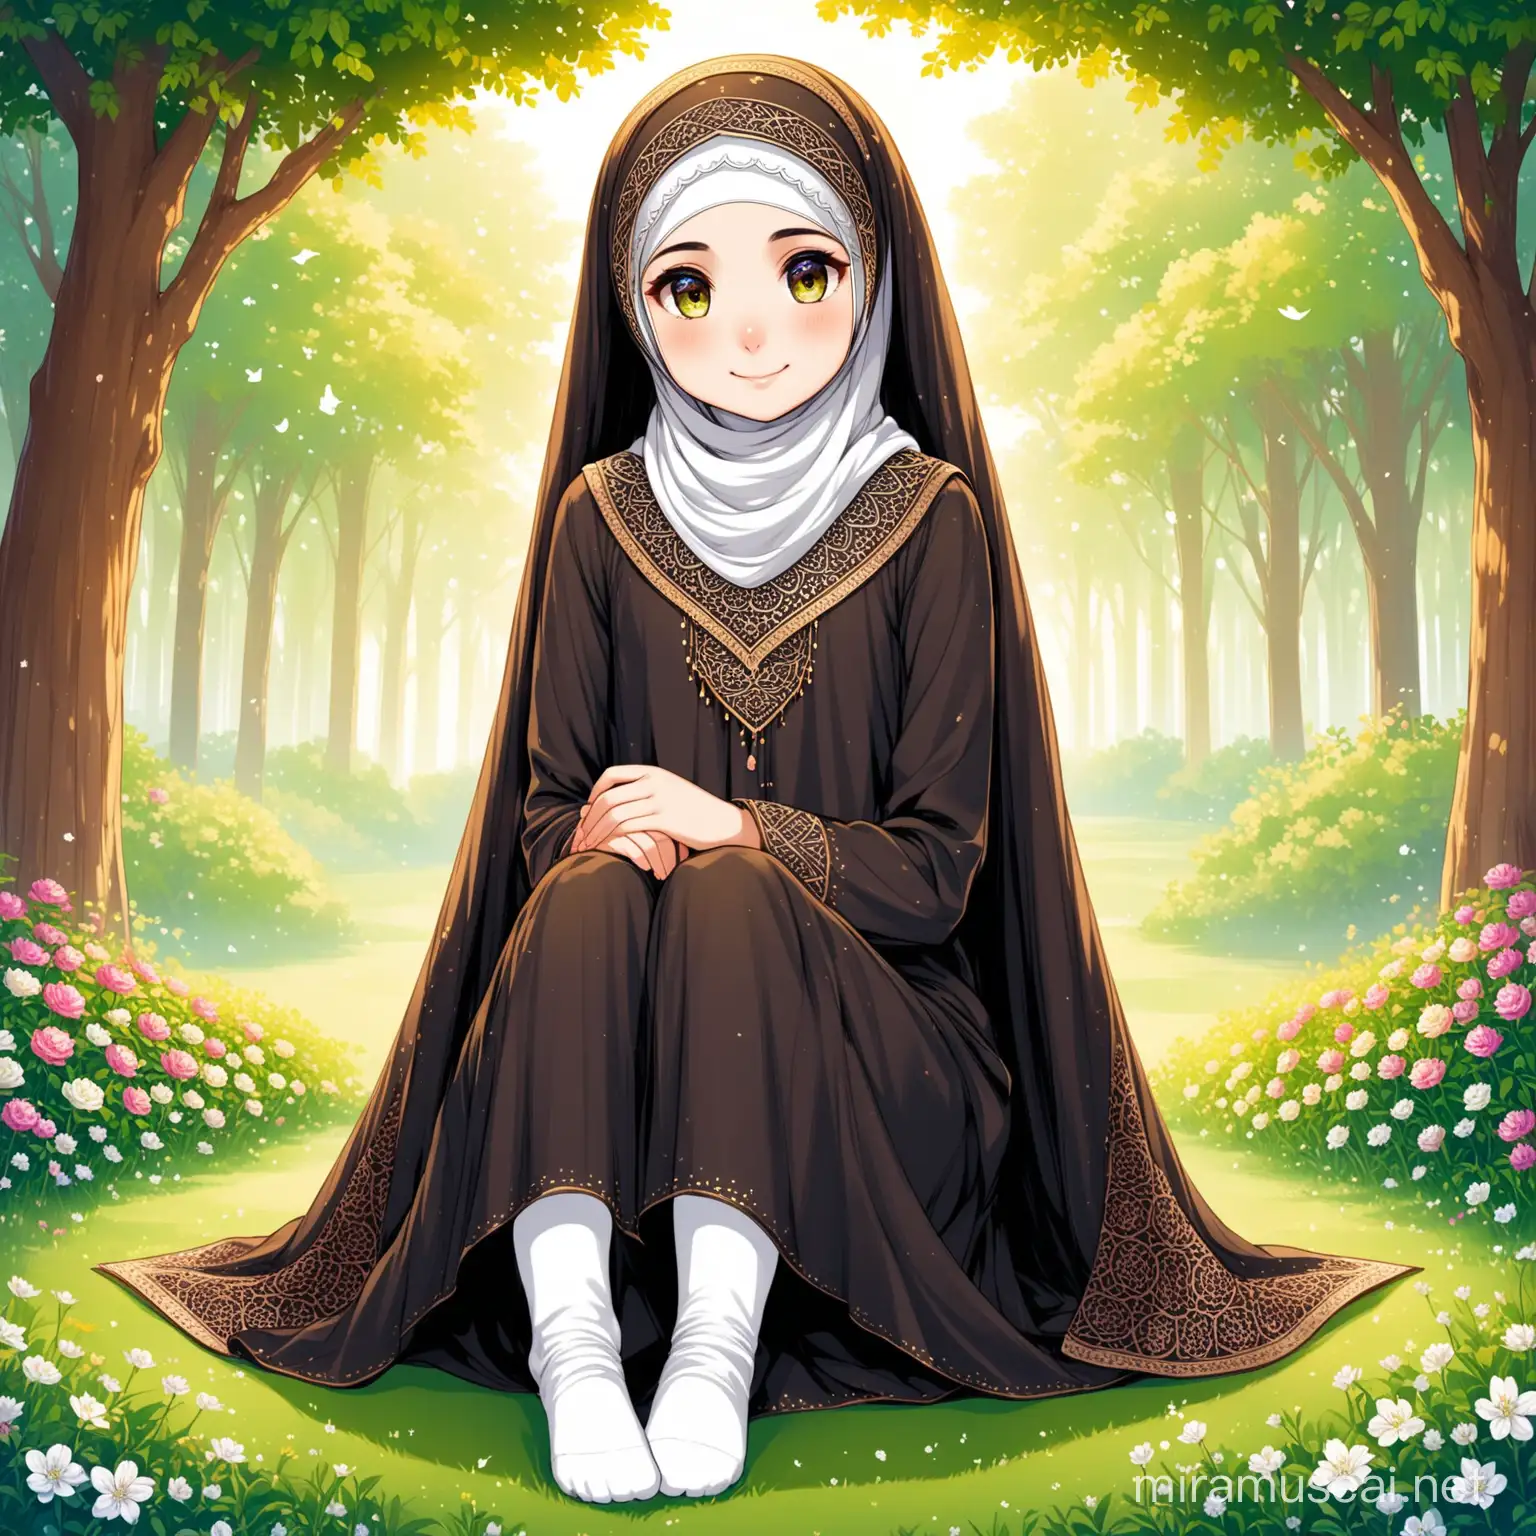 Persian Girl Fatemeh Sitting with Mother Roqayeh in Forest Clearing